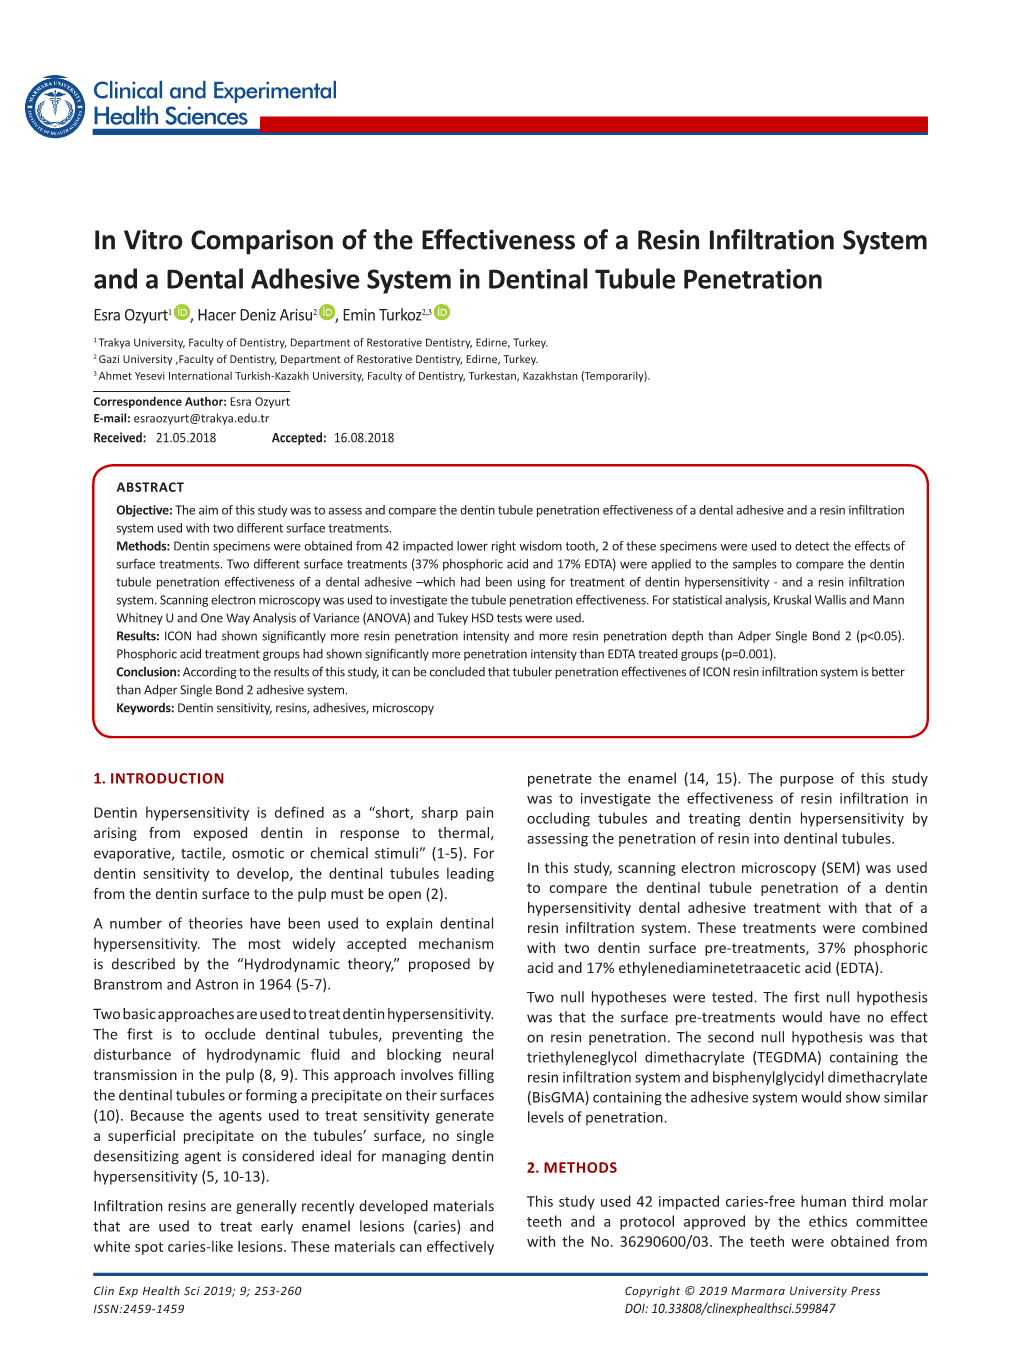 In Vitro Comparison of the Effectiveness of a Resin Infiltration